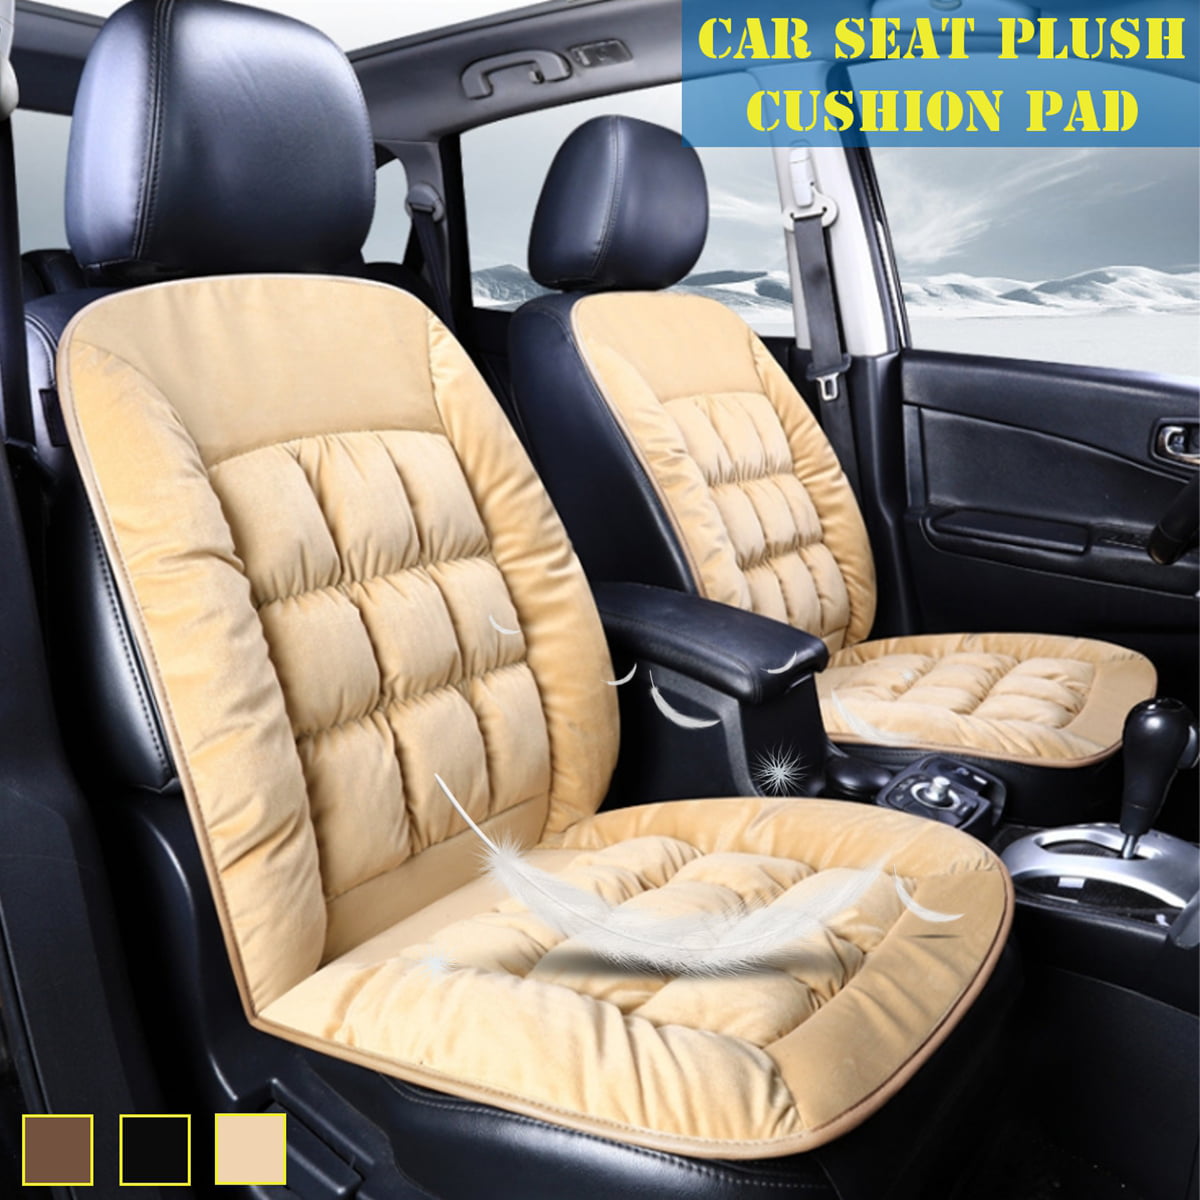 SUV Truck or Van INTERESTPRINT Eiffel Tower Auto Seat Covers Full Set of 2 Bucket Seat Protector Car Seat Cushions for Car 